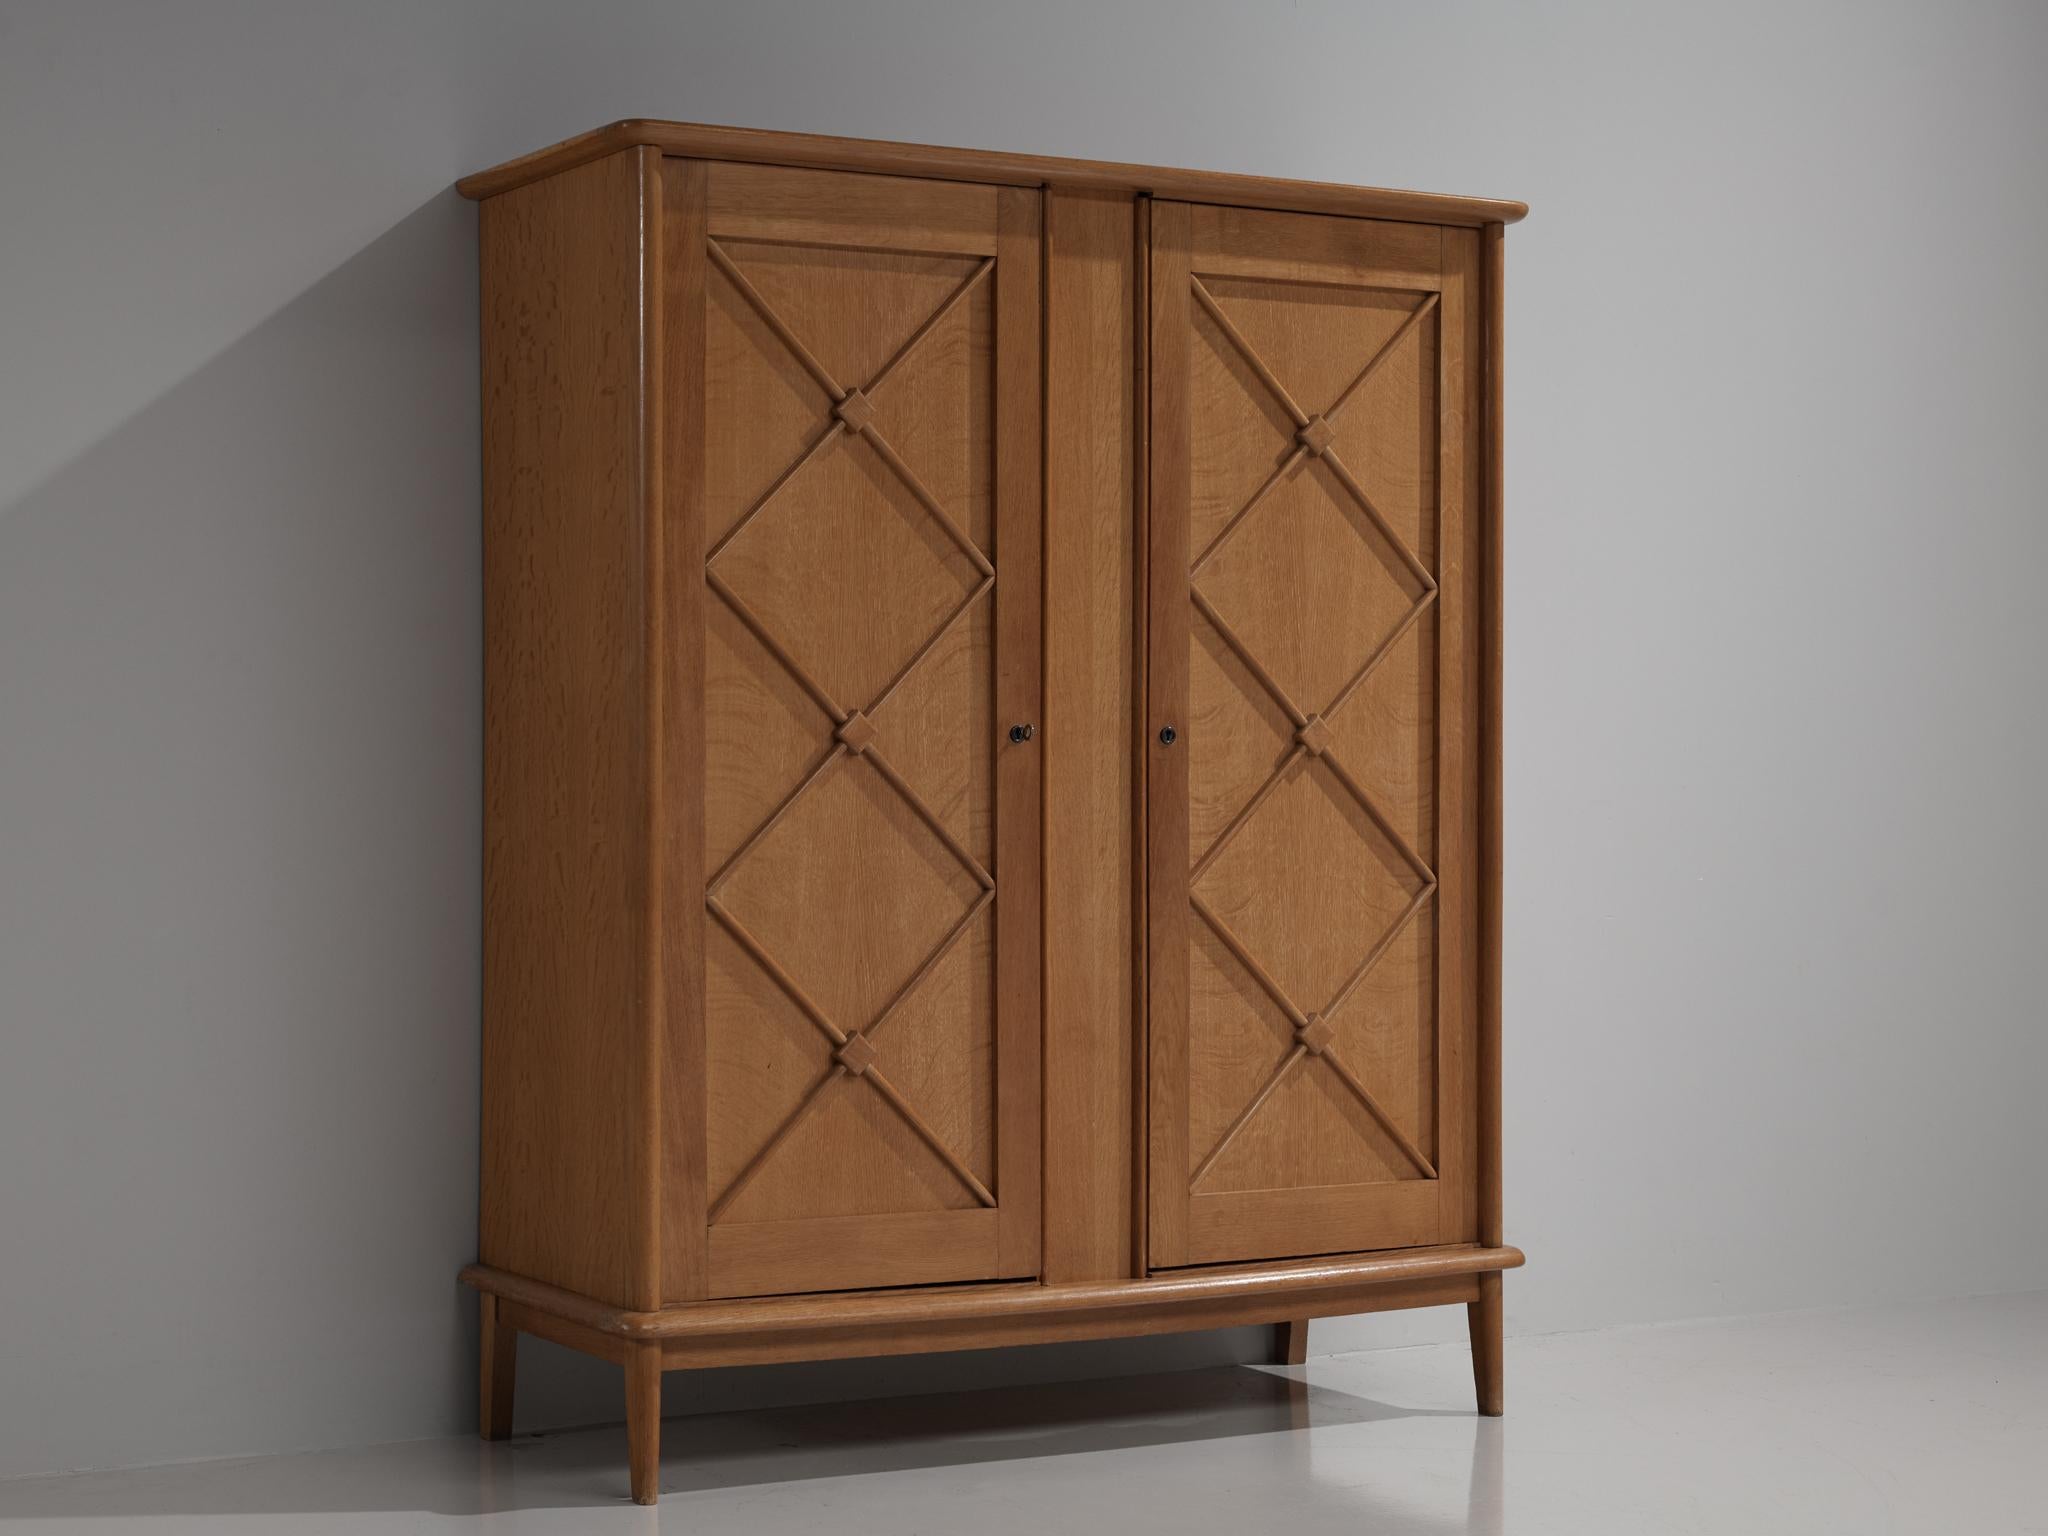 Large cabinet, oak, France, 1950s

An elegant case piece in oak that features geometric details on the doors. The high board is lifted from the ground by slim, conical legs that give the solid looking body a more airy appearance. The cabinet